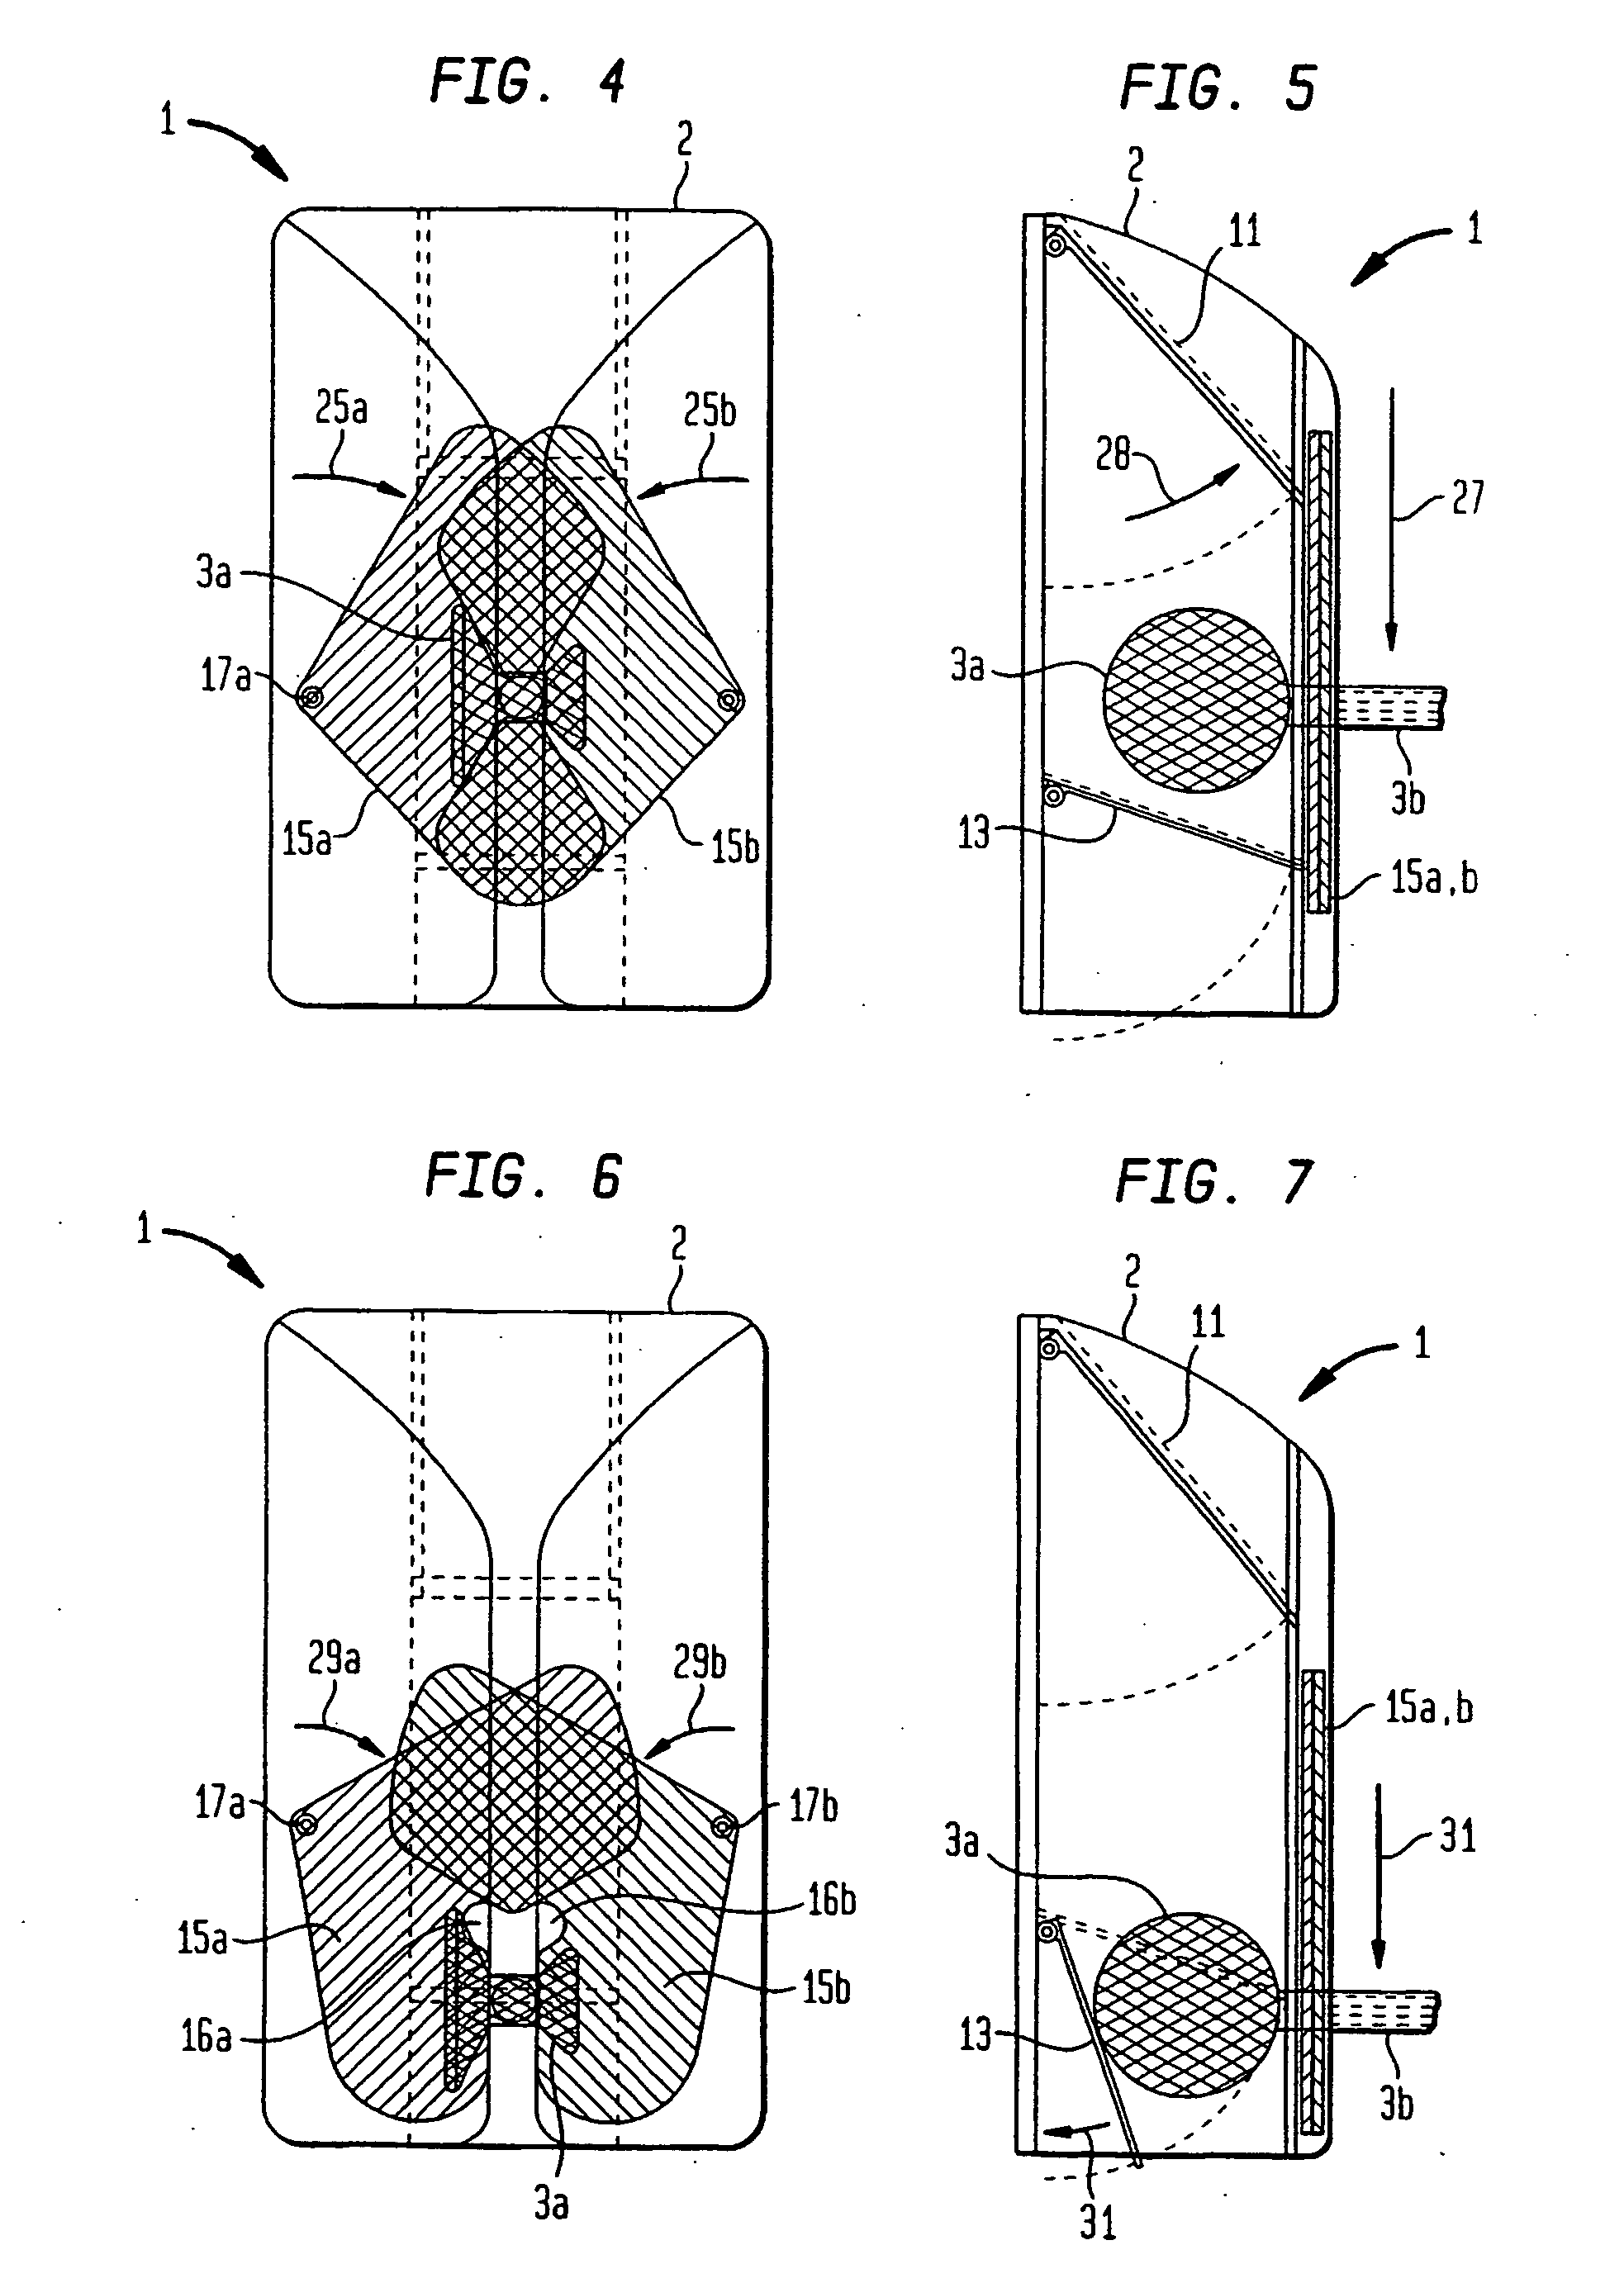 Methods and apparatus for indicating sterilization or disinfection of objects